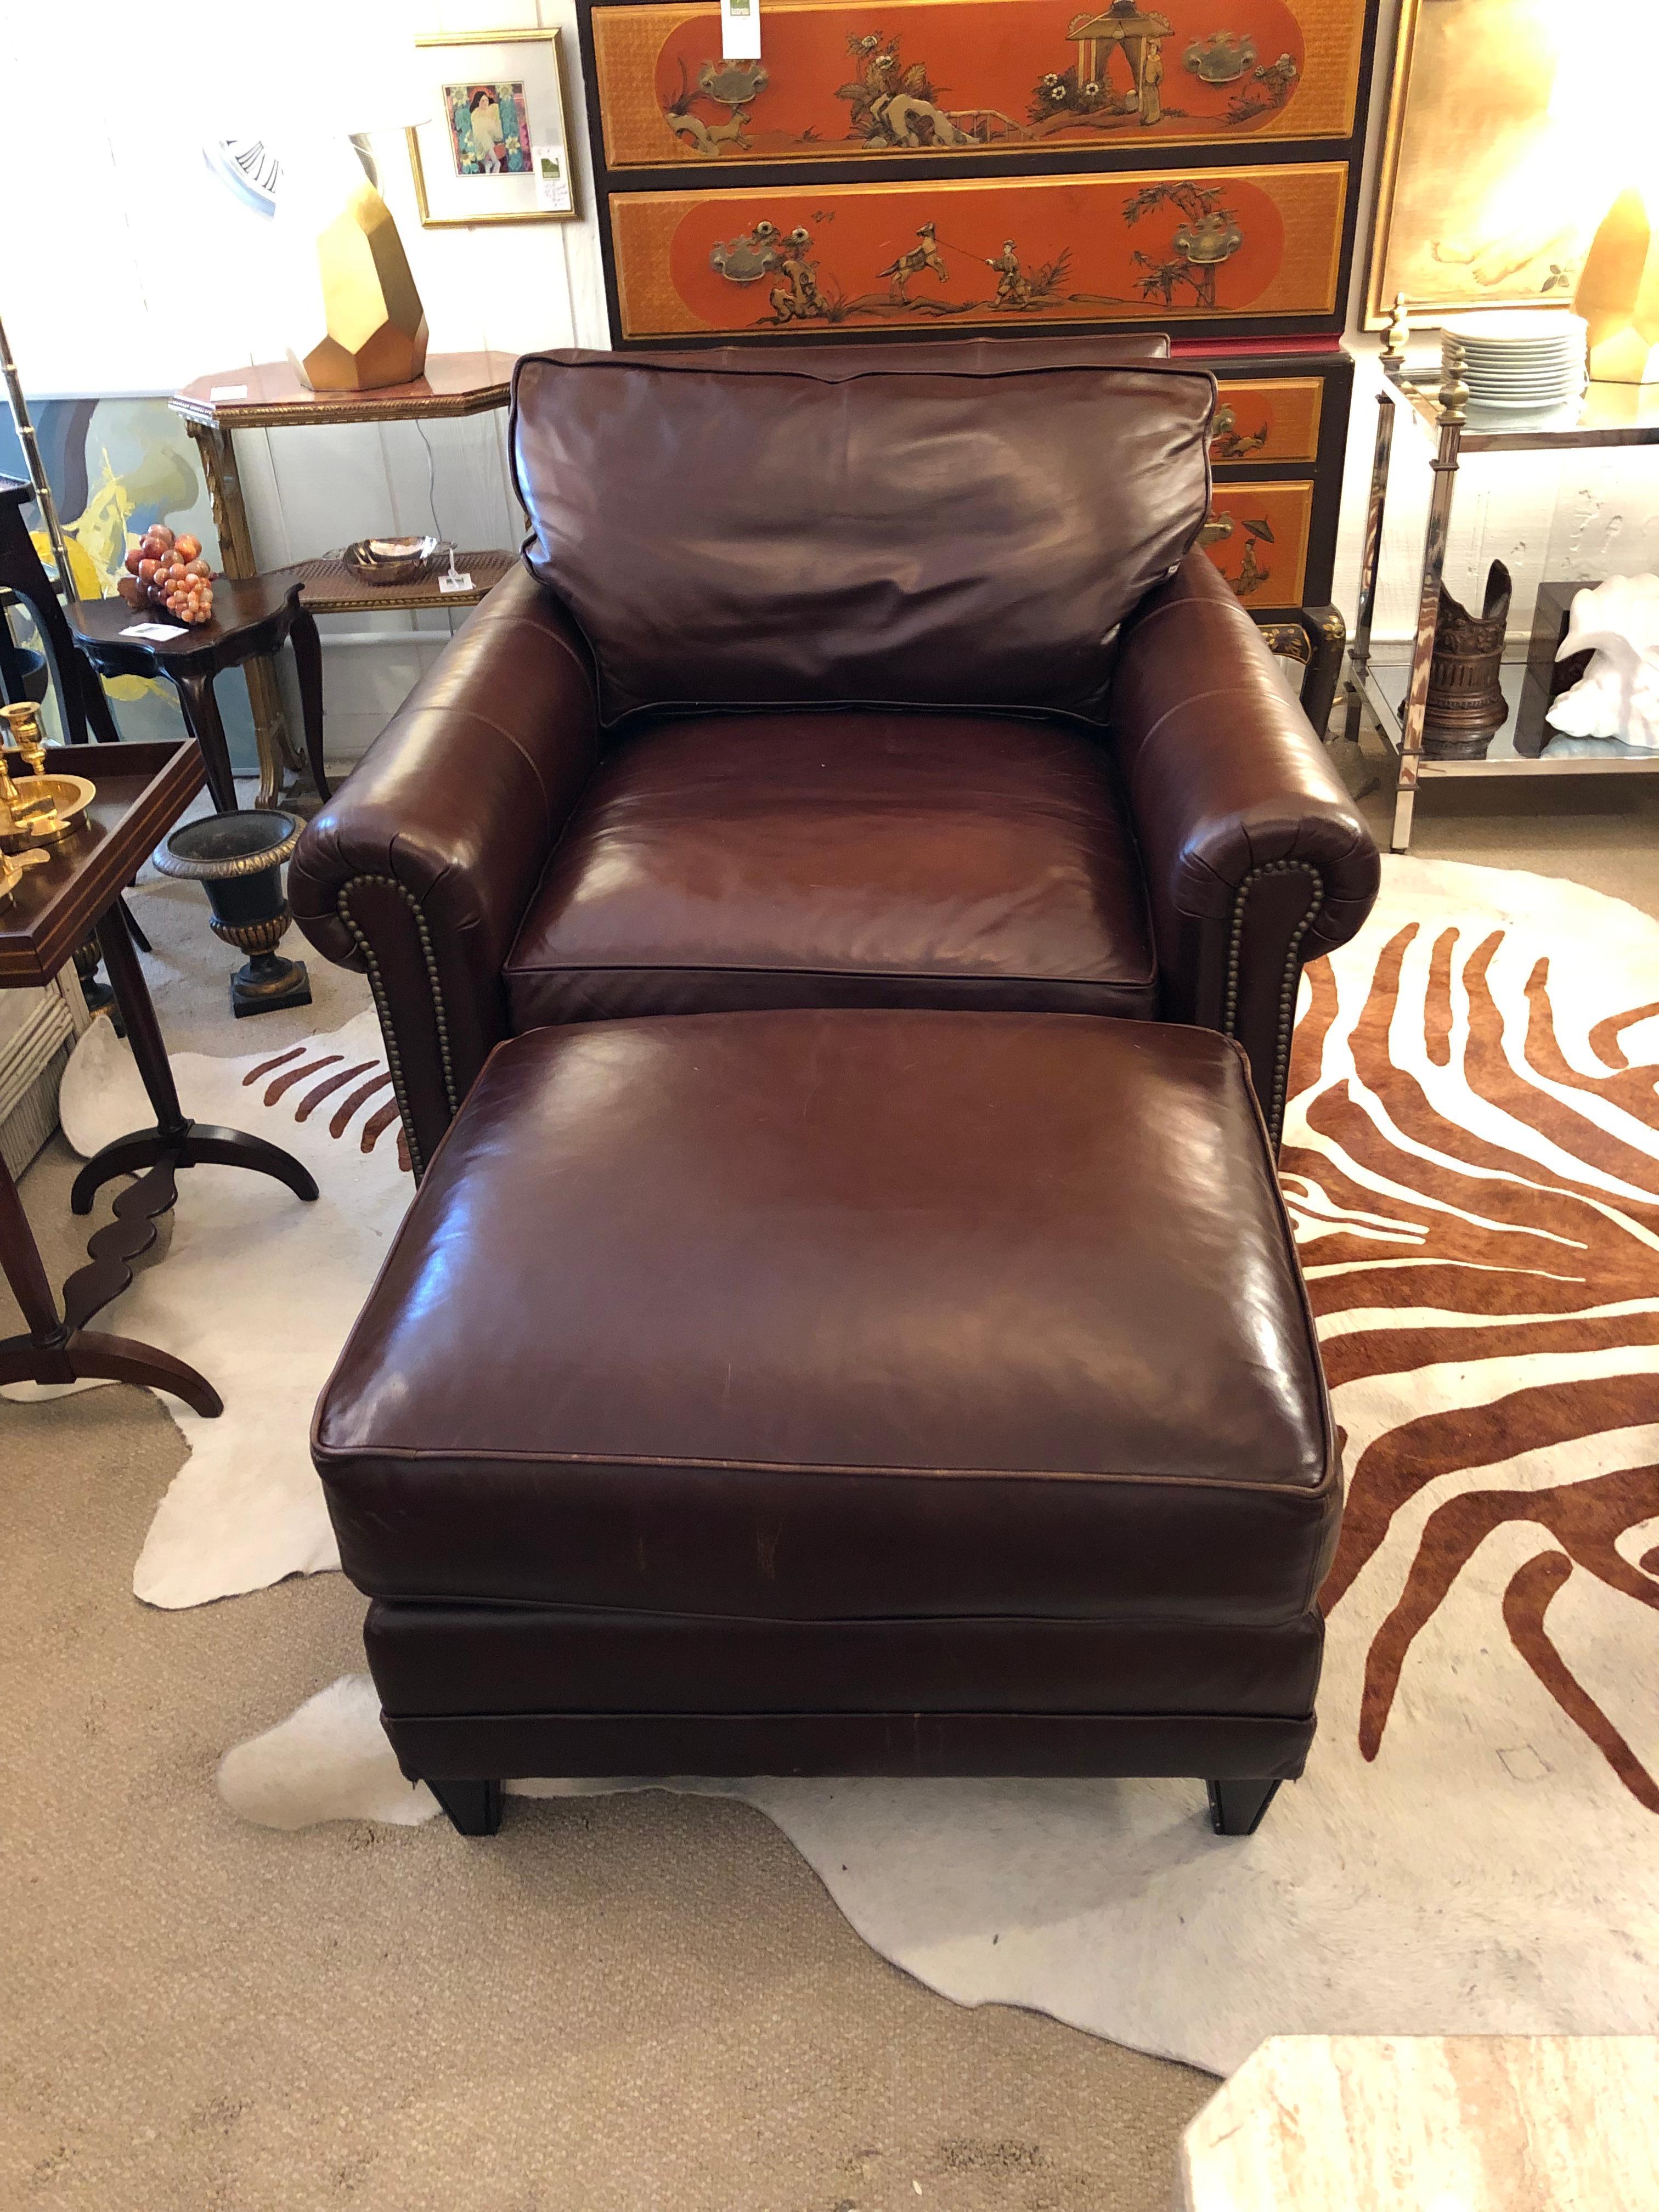 Rich dark brown supple brown leather large club chair by Ralph Lauren having down cushions and handsome nailhead detailing. 33 w at back 39. 5 at arms
Comes with matching leather ottoman. So comfy, naps guaranteed in it!
Measures: 26.5 L x 22. 25